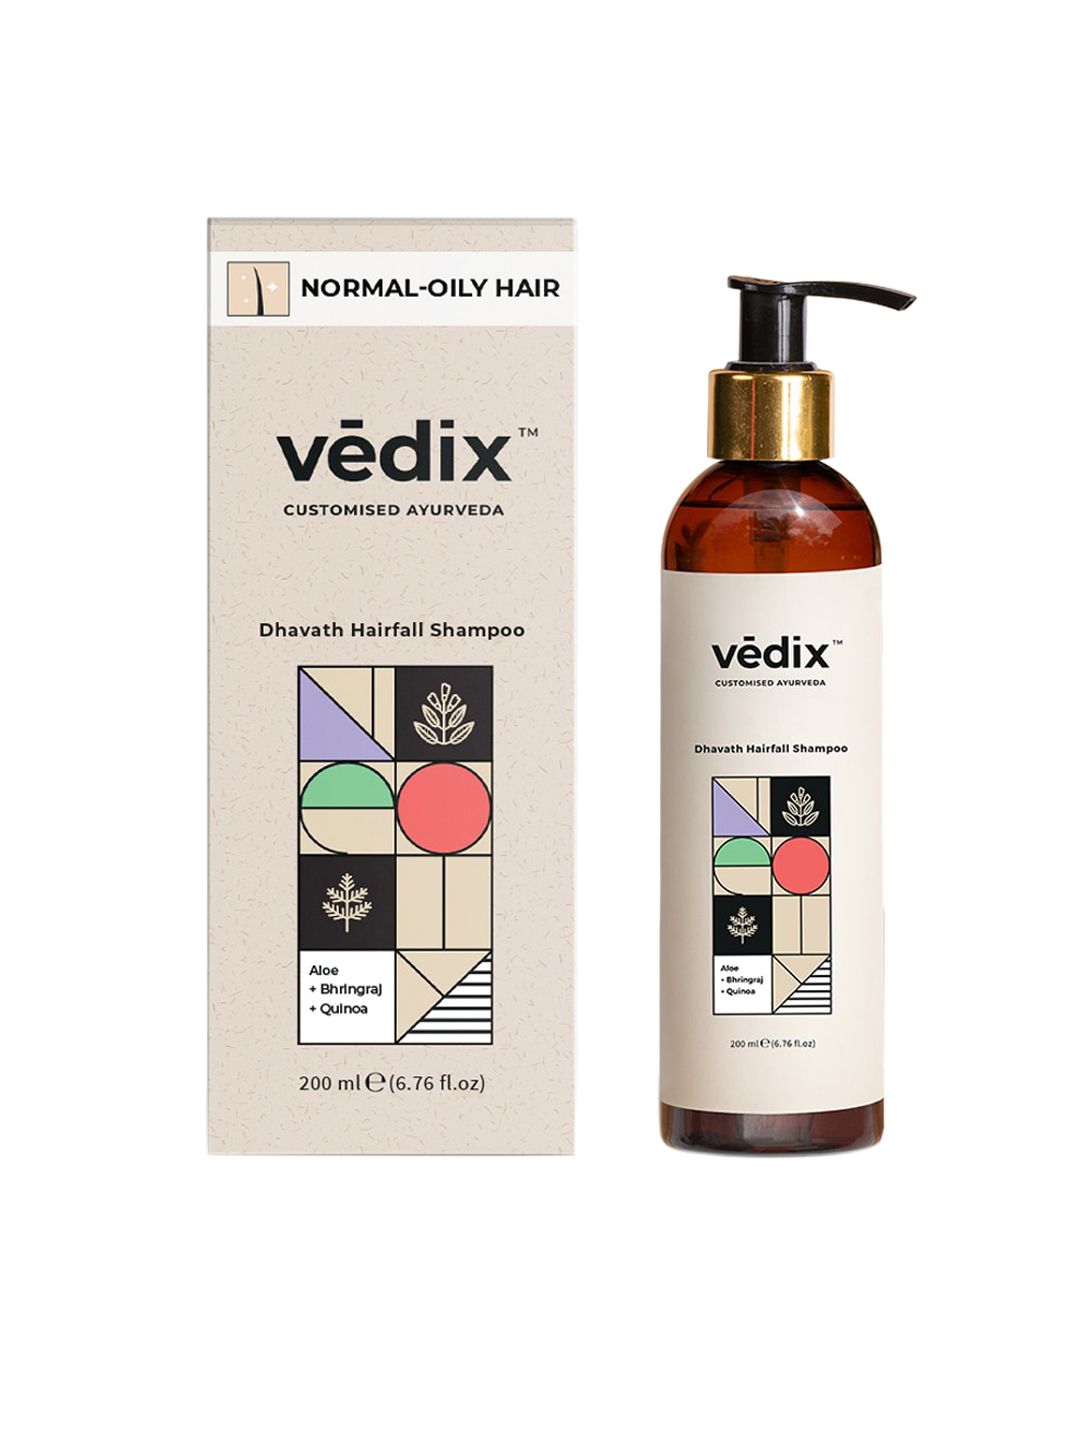 VEDIX Customized Ayurvedic Dhavath Hairfall Shampoo - For Normal & Oily Hair Price in India